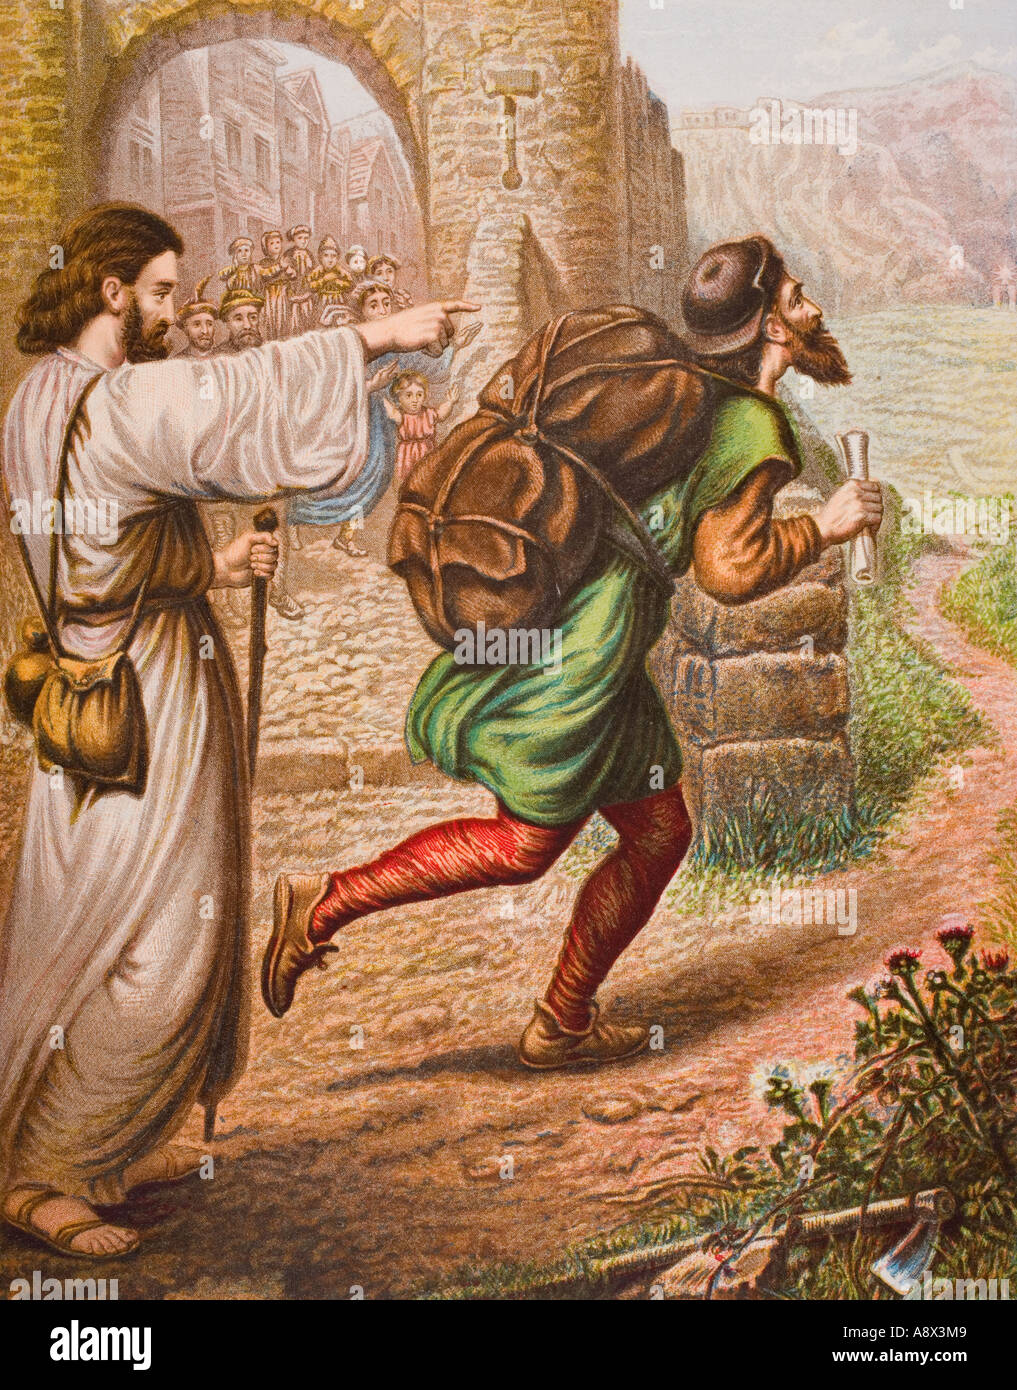 Evangelist directs Christian on his way. From the book The Pilgrim's Progress by John Bunyan, late 19th century edition. Stock Photo